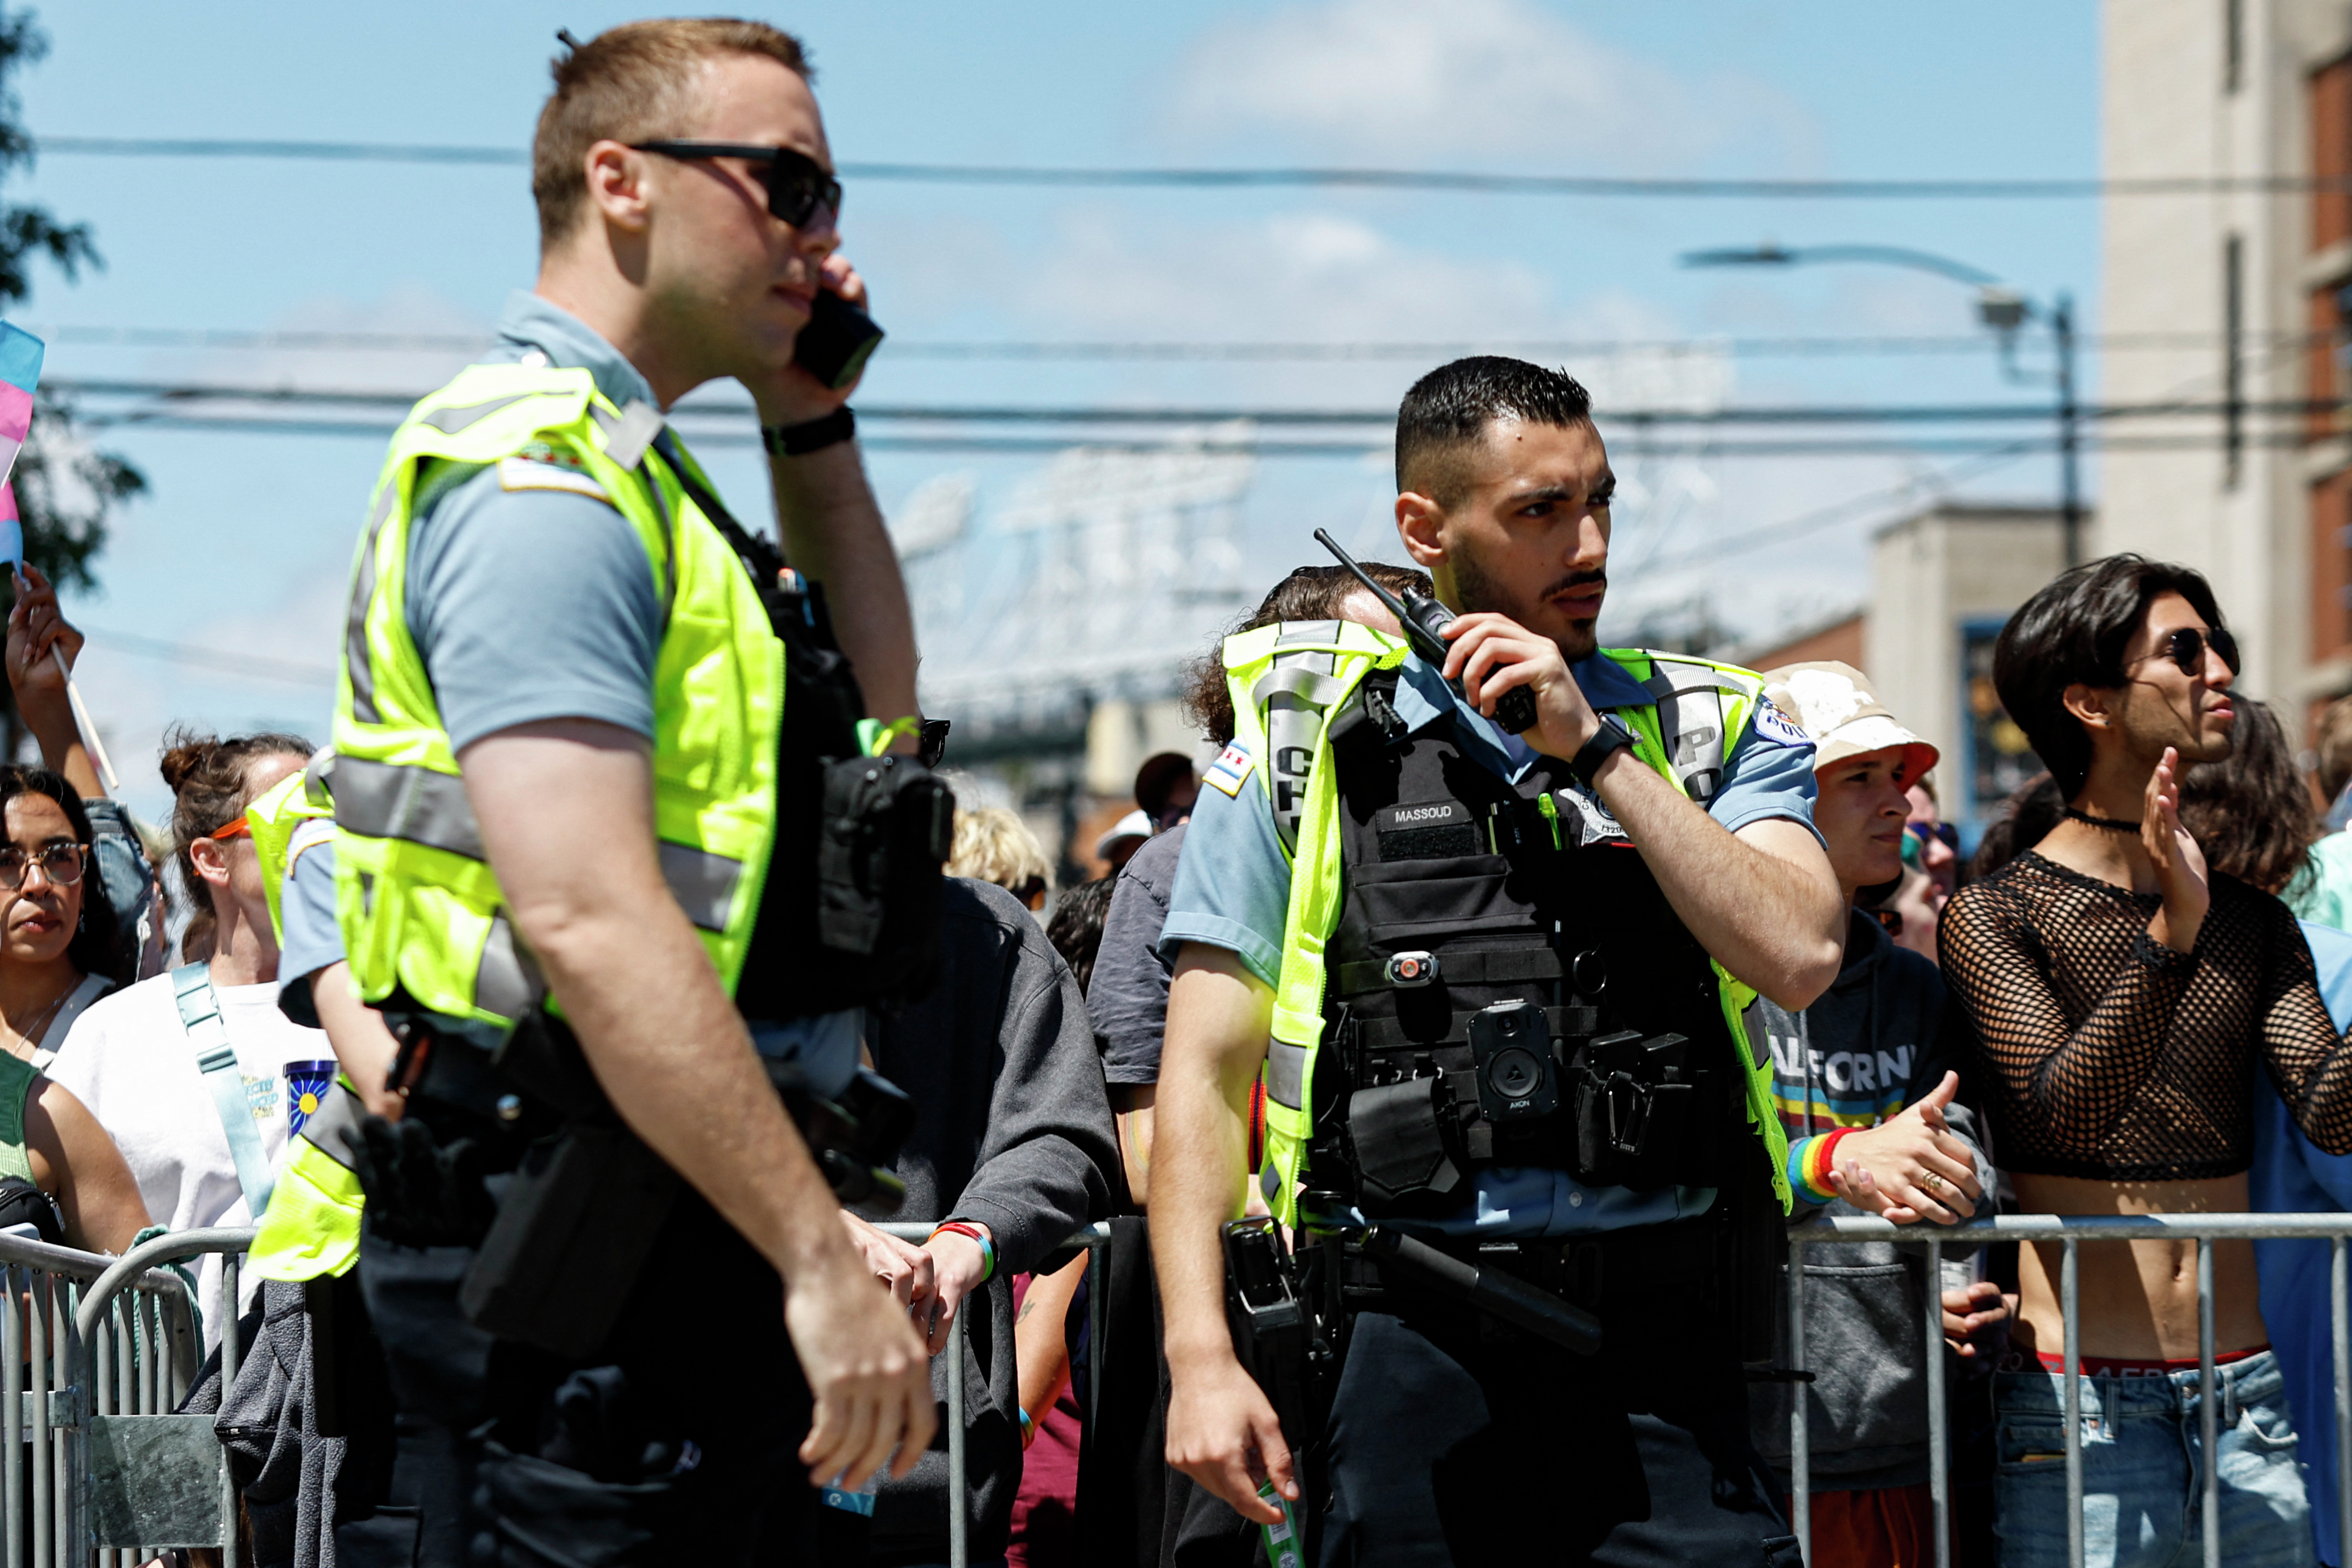 Police report 'mass arrest' on North Side following Pride Parade